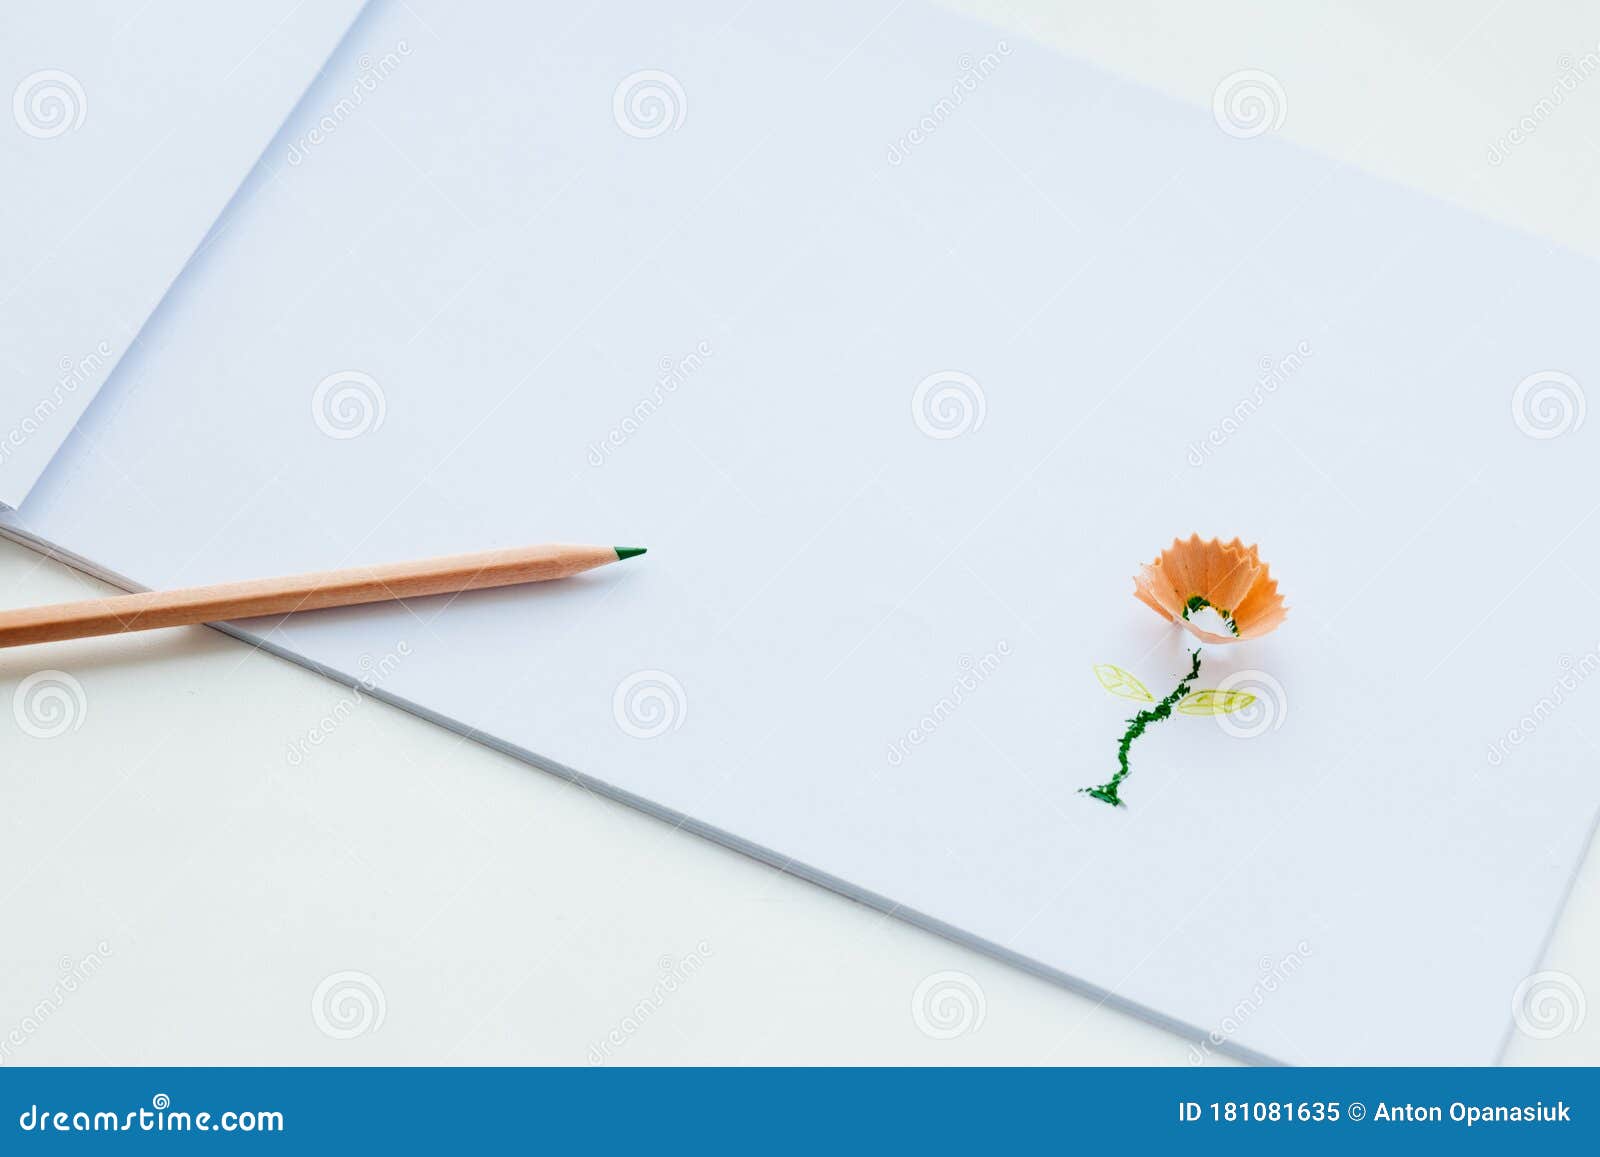 Beautiful Little Flower Made Of Pencil Shavings On A White Landscape Paper Stock Image Image Of Business Object